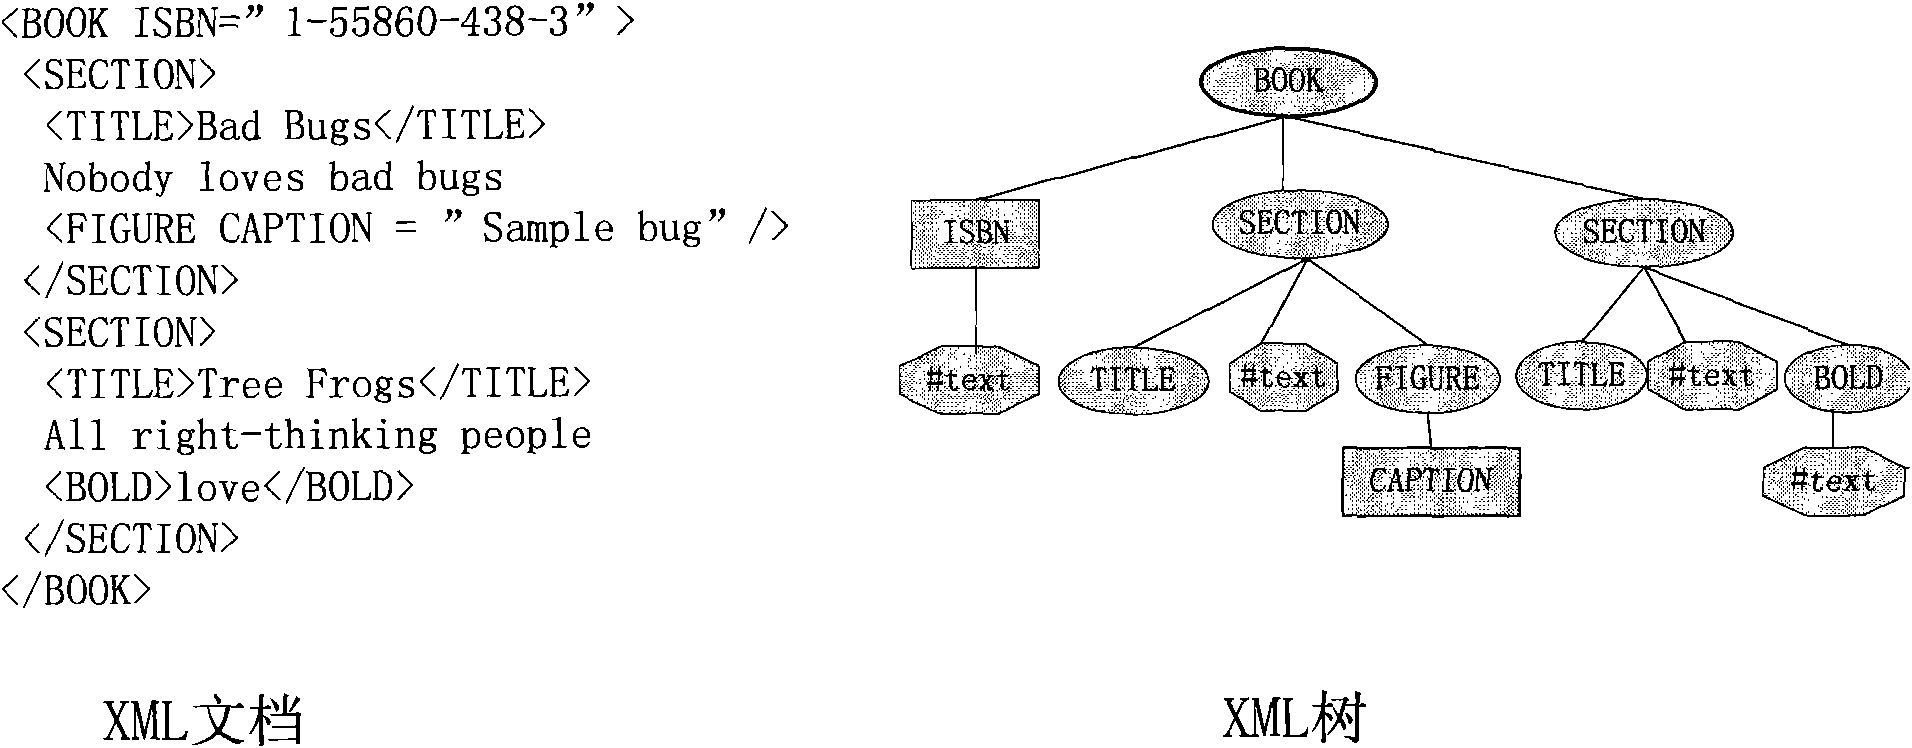 Method for calculating similarity of XML documents